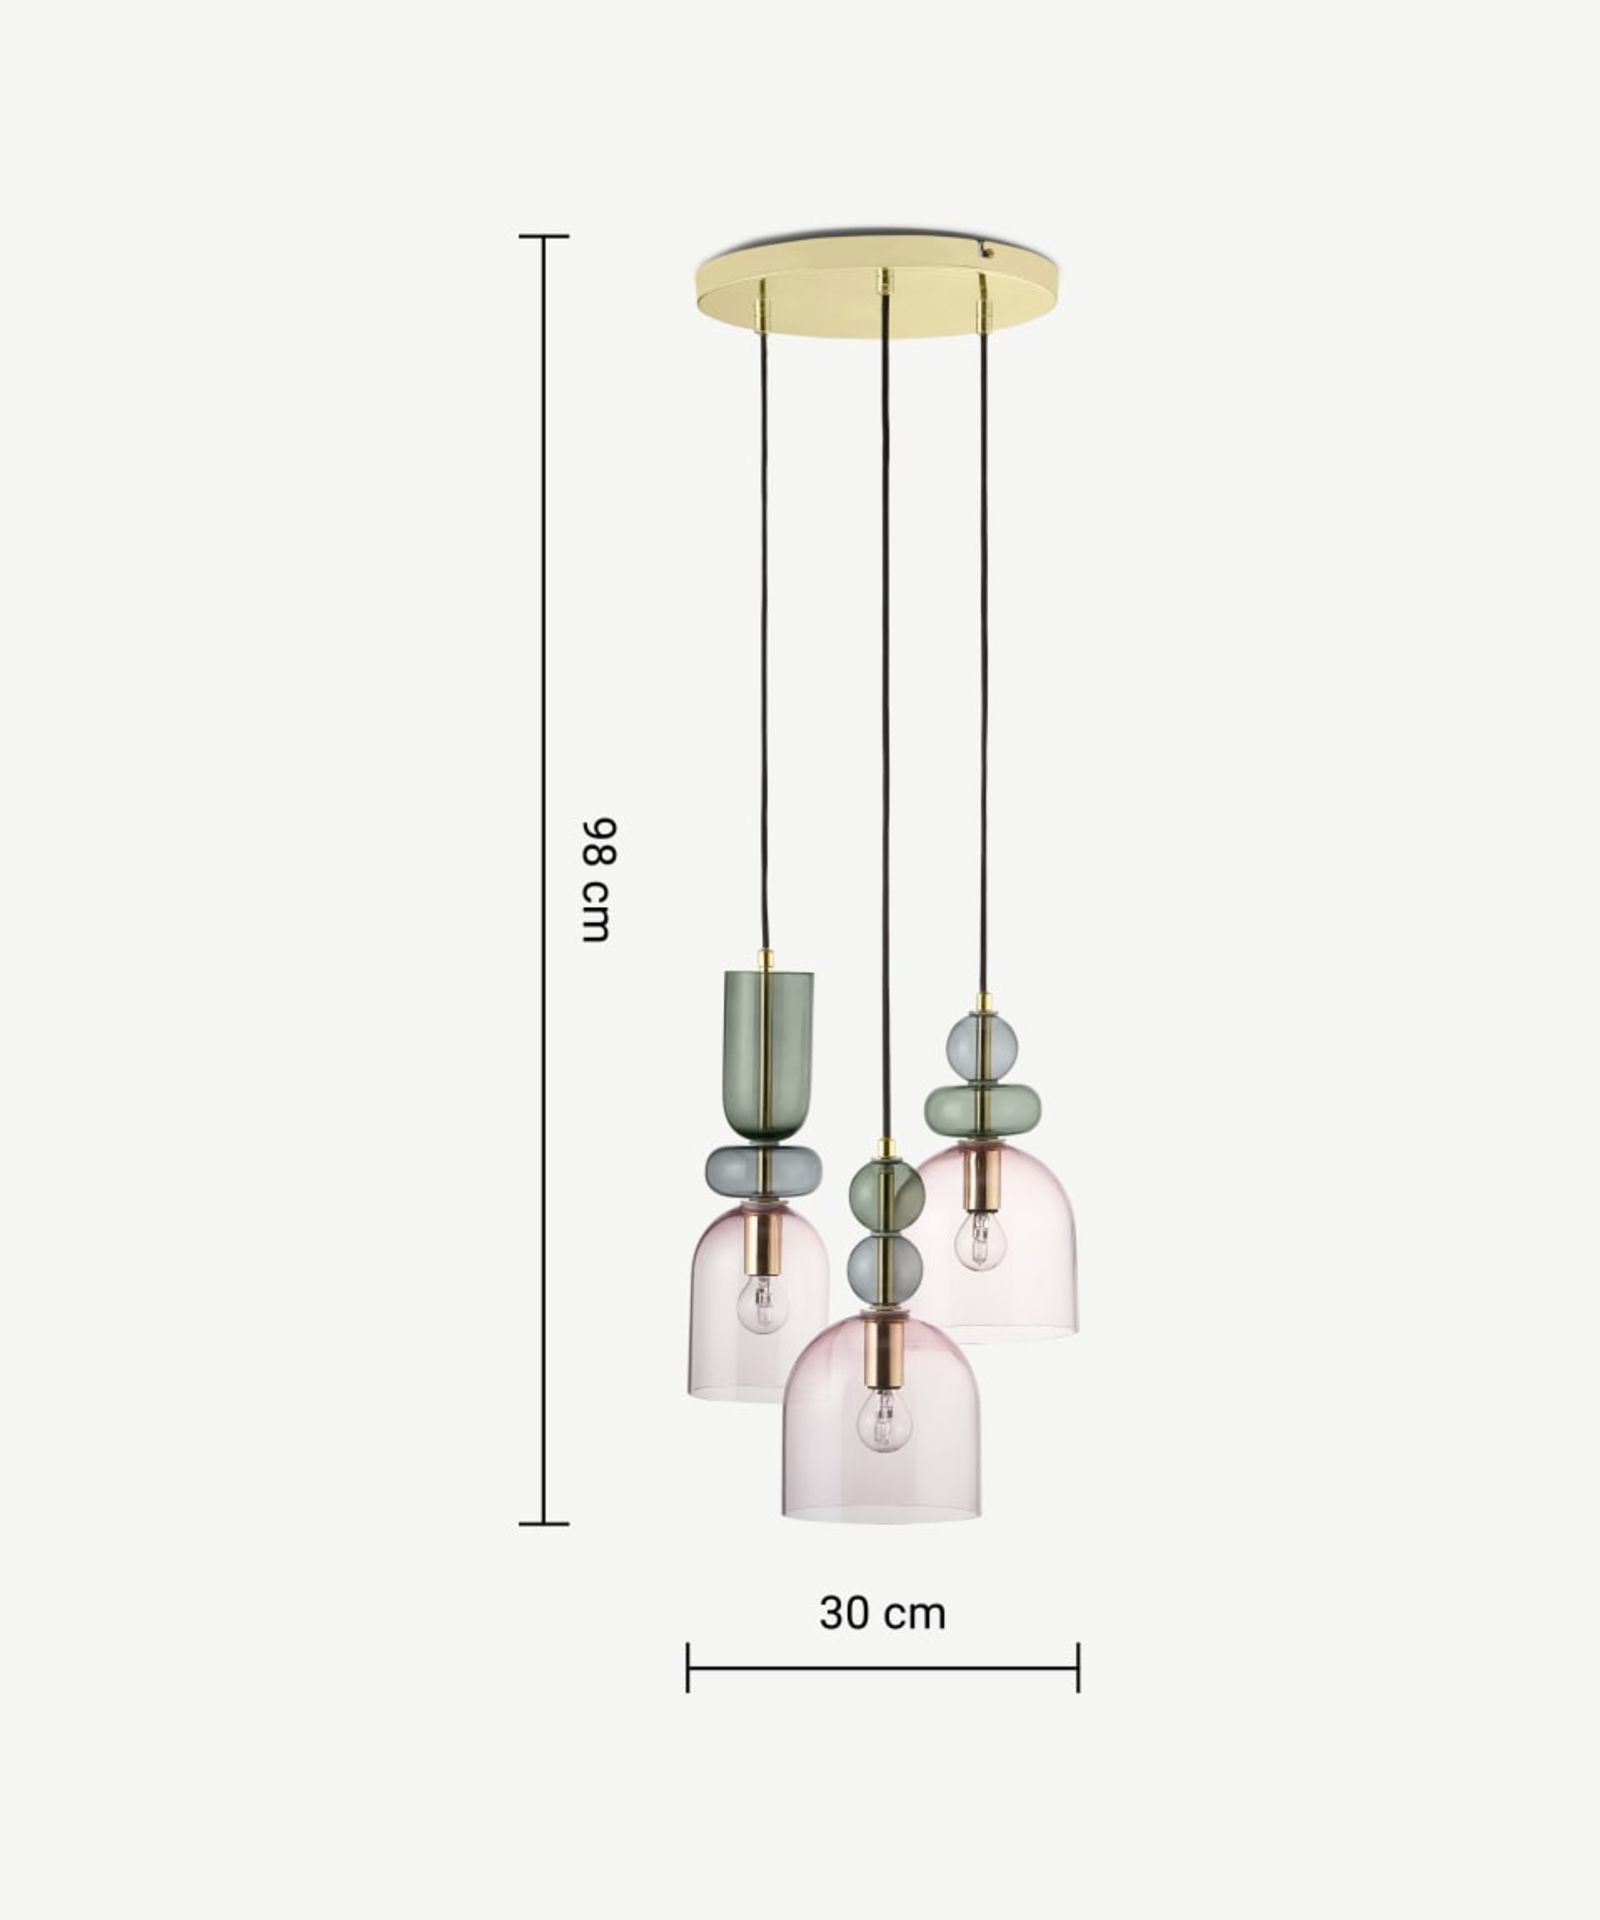 |1X|Whitney Cluster Pendant Lamp, Green Multi RRP - £149 |A56 - 2 -CLPWHI001GRE-UK |6G